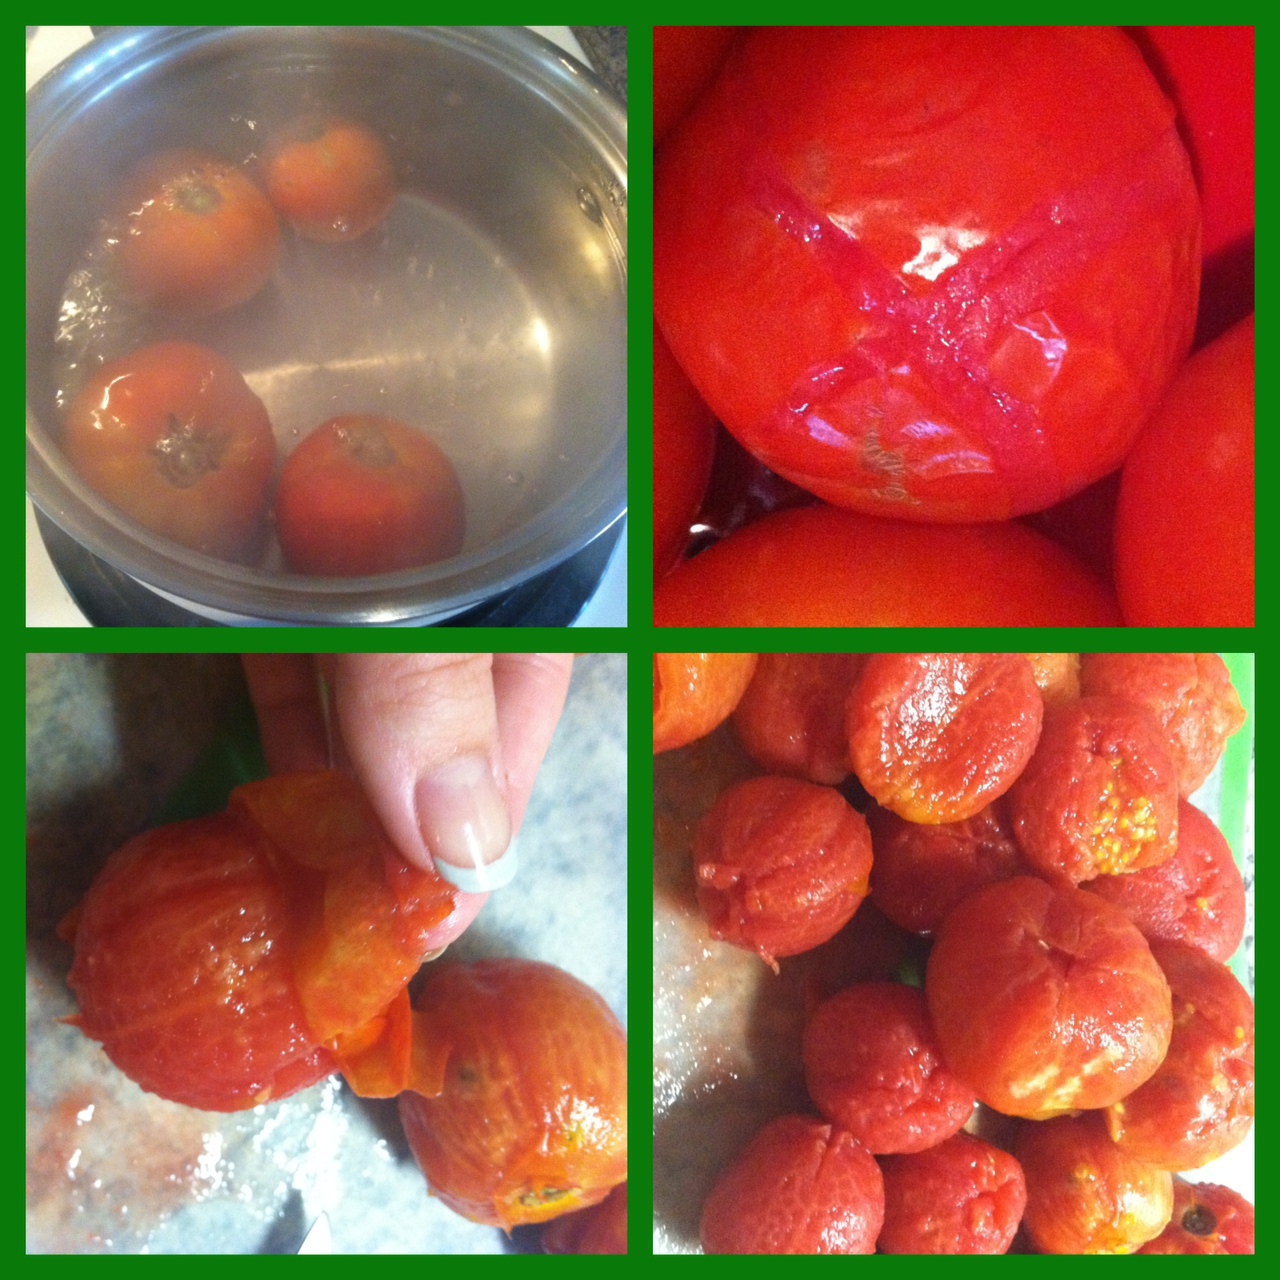 blanch and peel the tomatoes